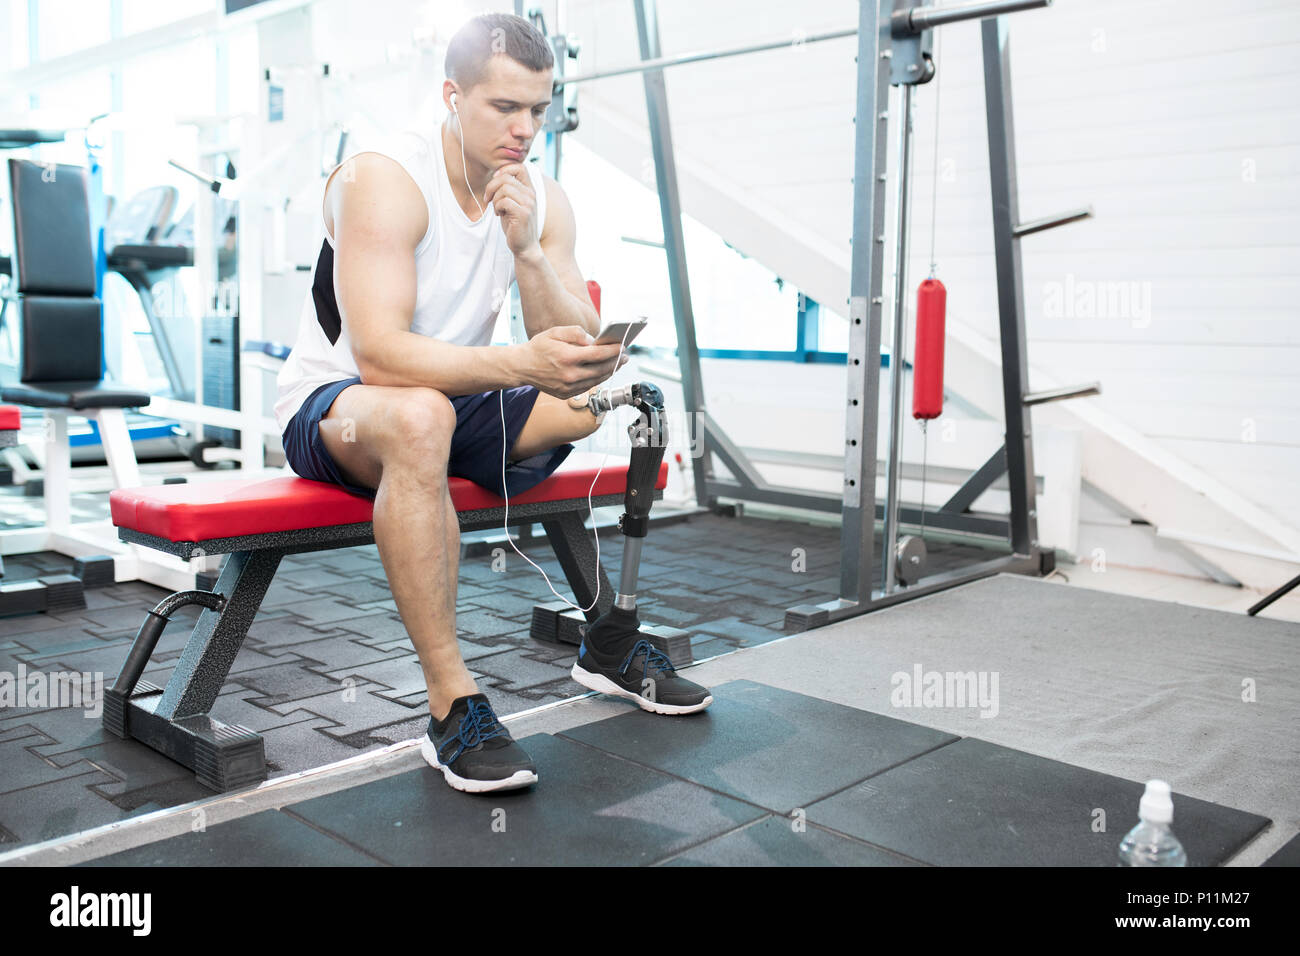 Man in gym Stock Photo